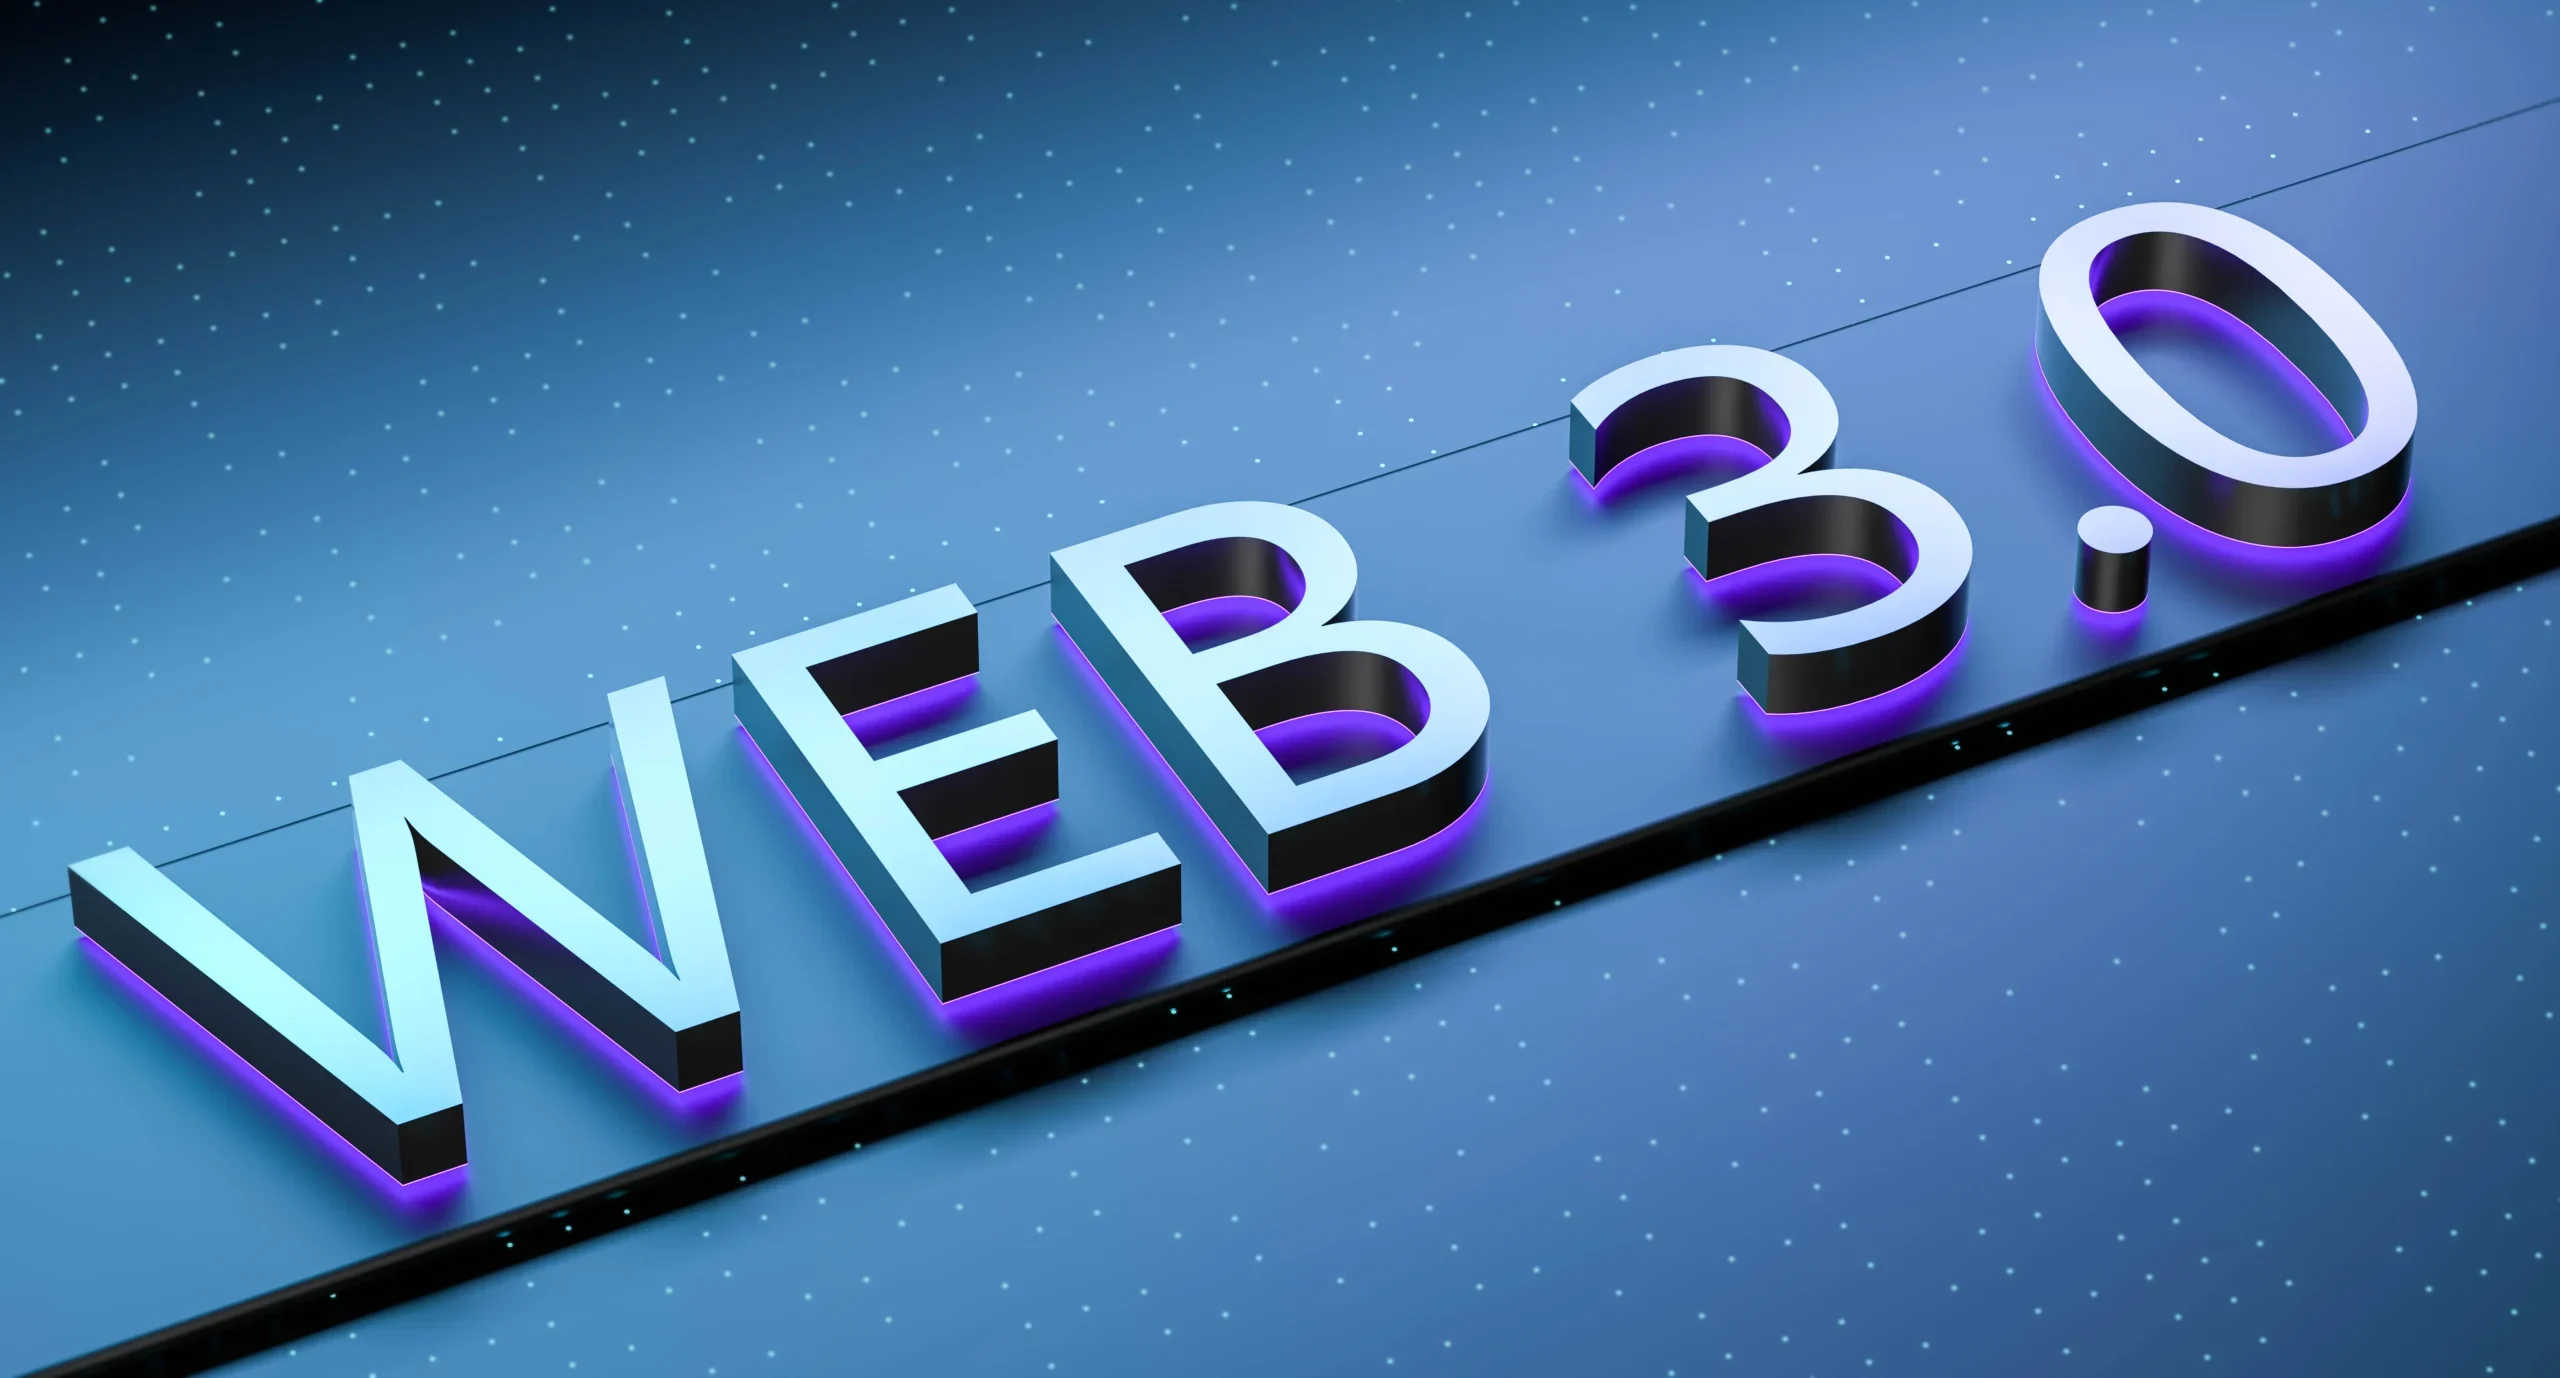 web-30-concept-with-neon-lights-blurred-background-web-3-concept